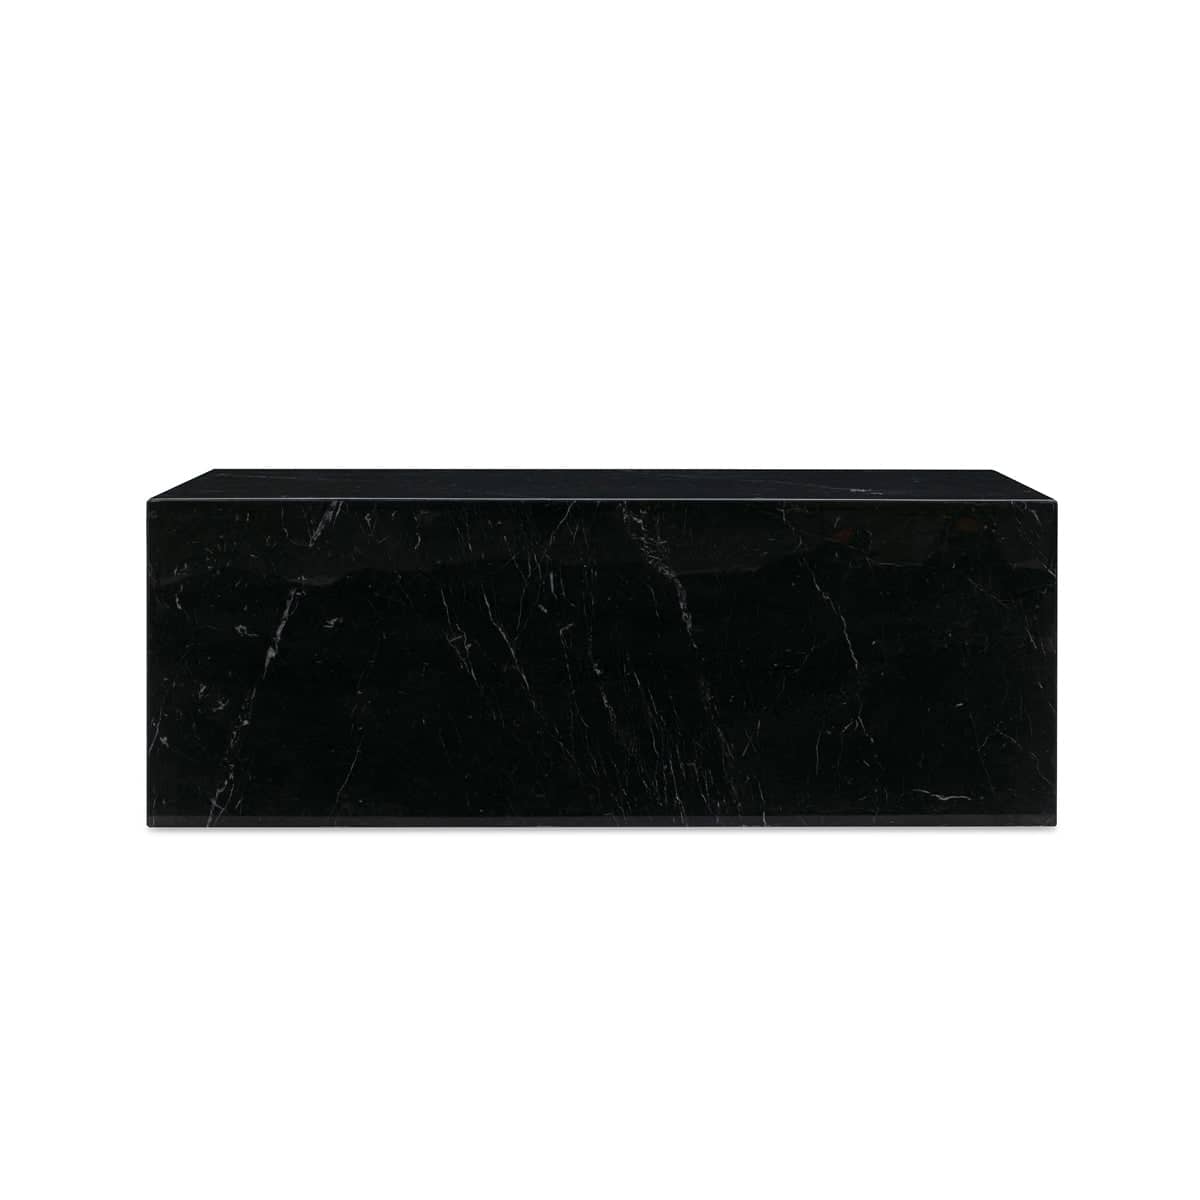 Buy Stage Marble Coffee Table - Black by RJ Living online - RJ Living